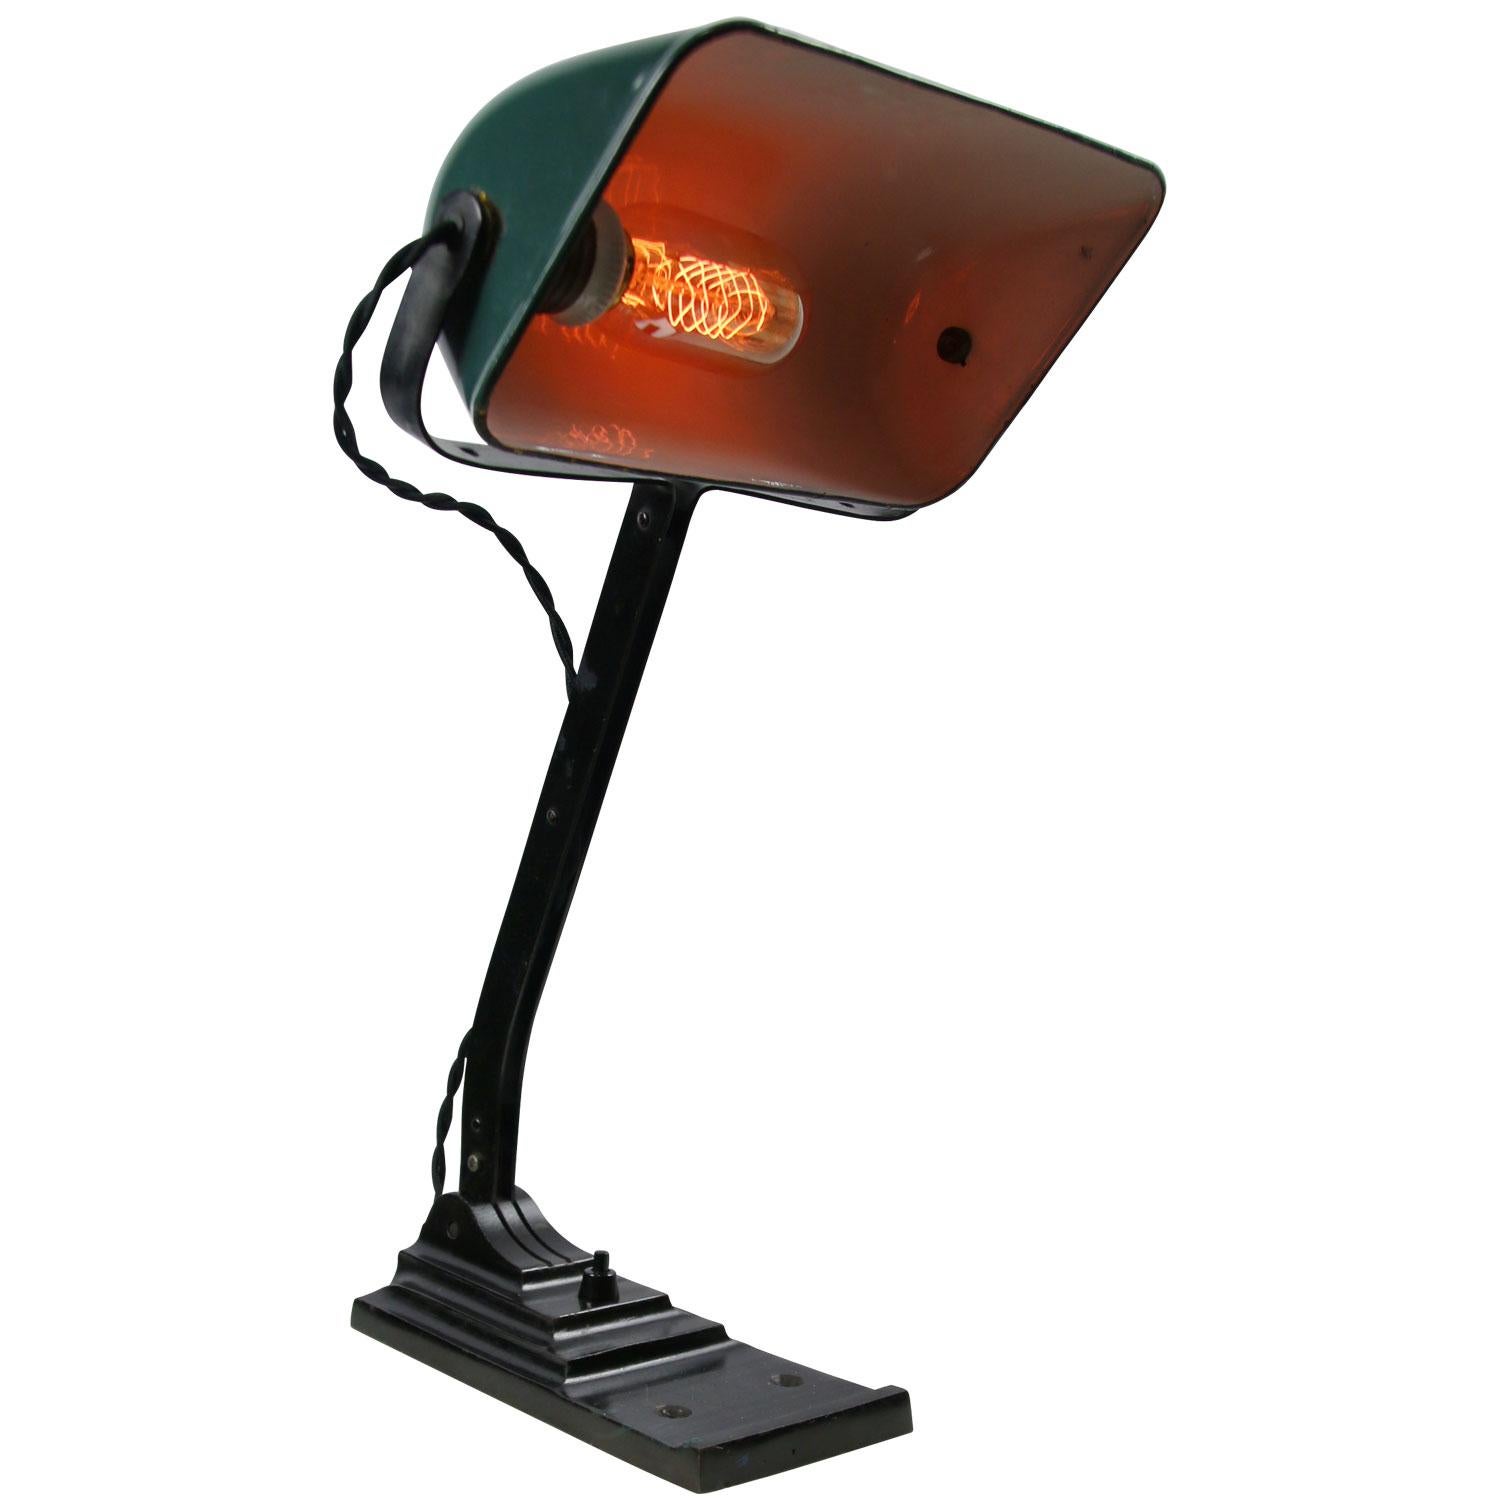 Belgian petrol green enamel desk light by Erpe
2.5 meter black cotton flex, plug and switch in base

Also available with US/UK plug

Weight: 2.00 kg / 4.4 lb

Priced per individual item. All lamps have been made suitable by international